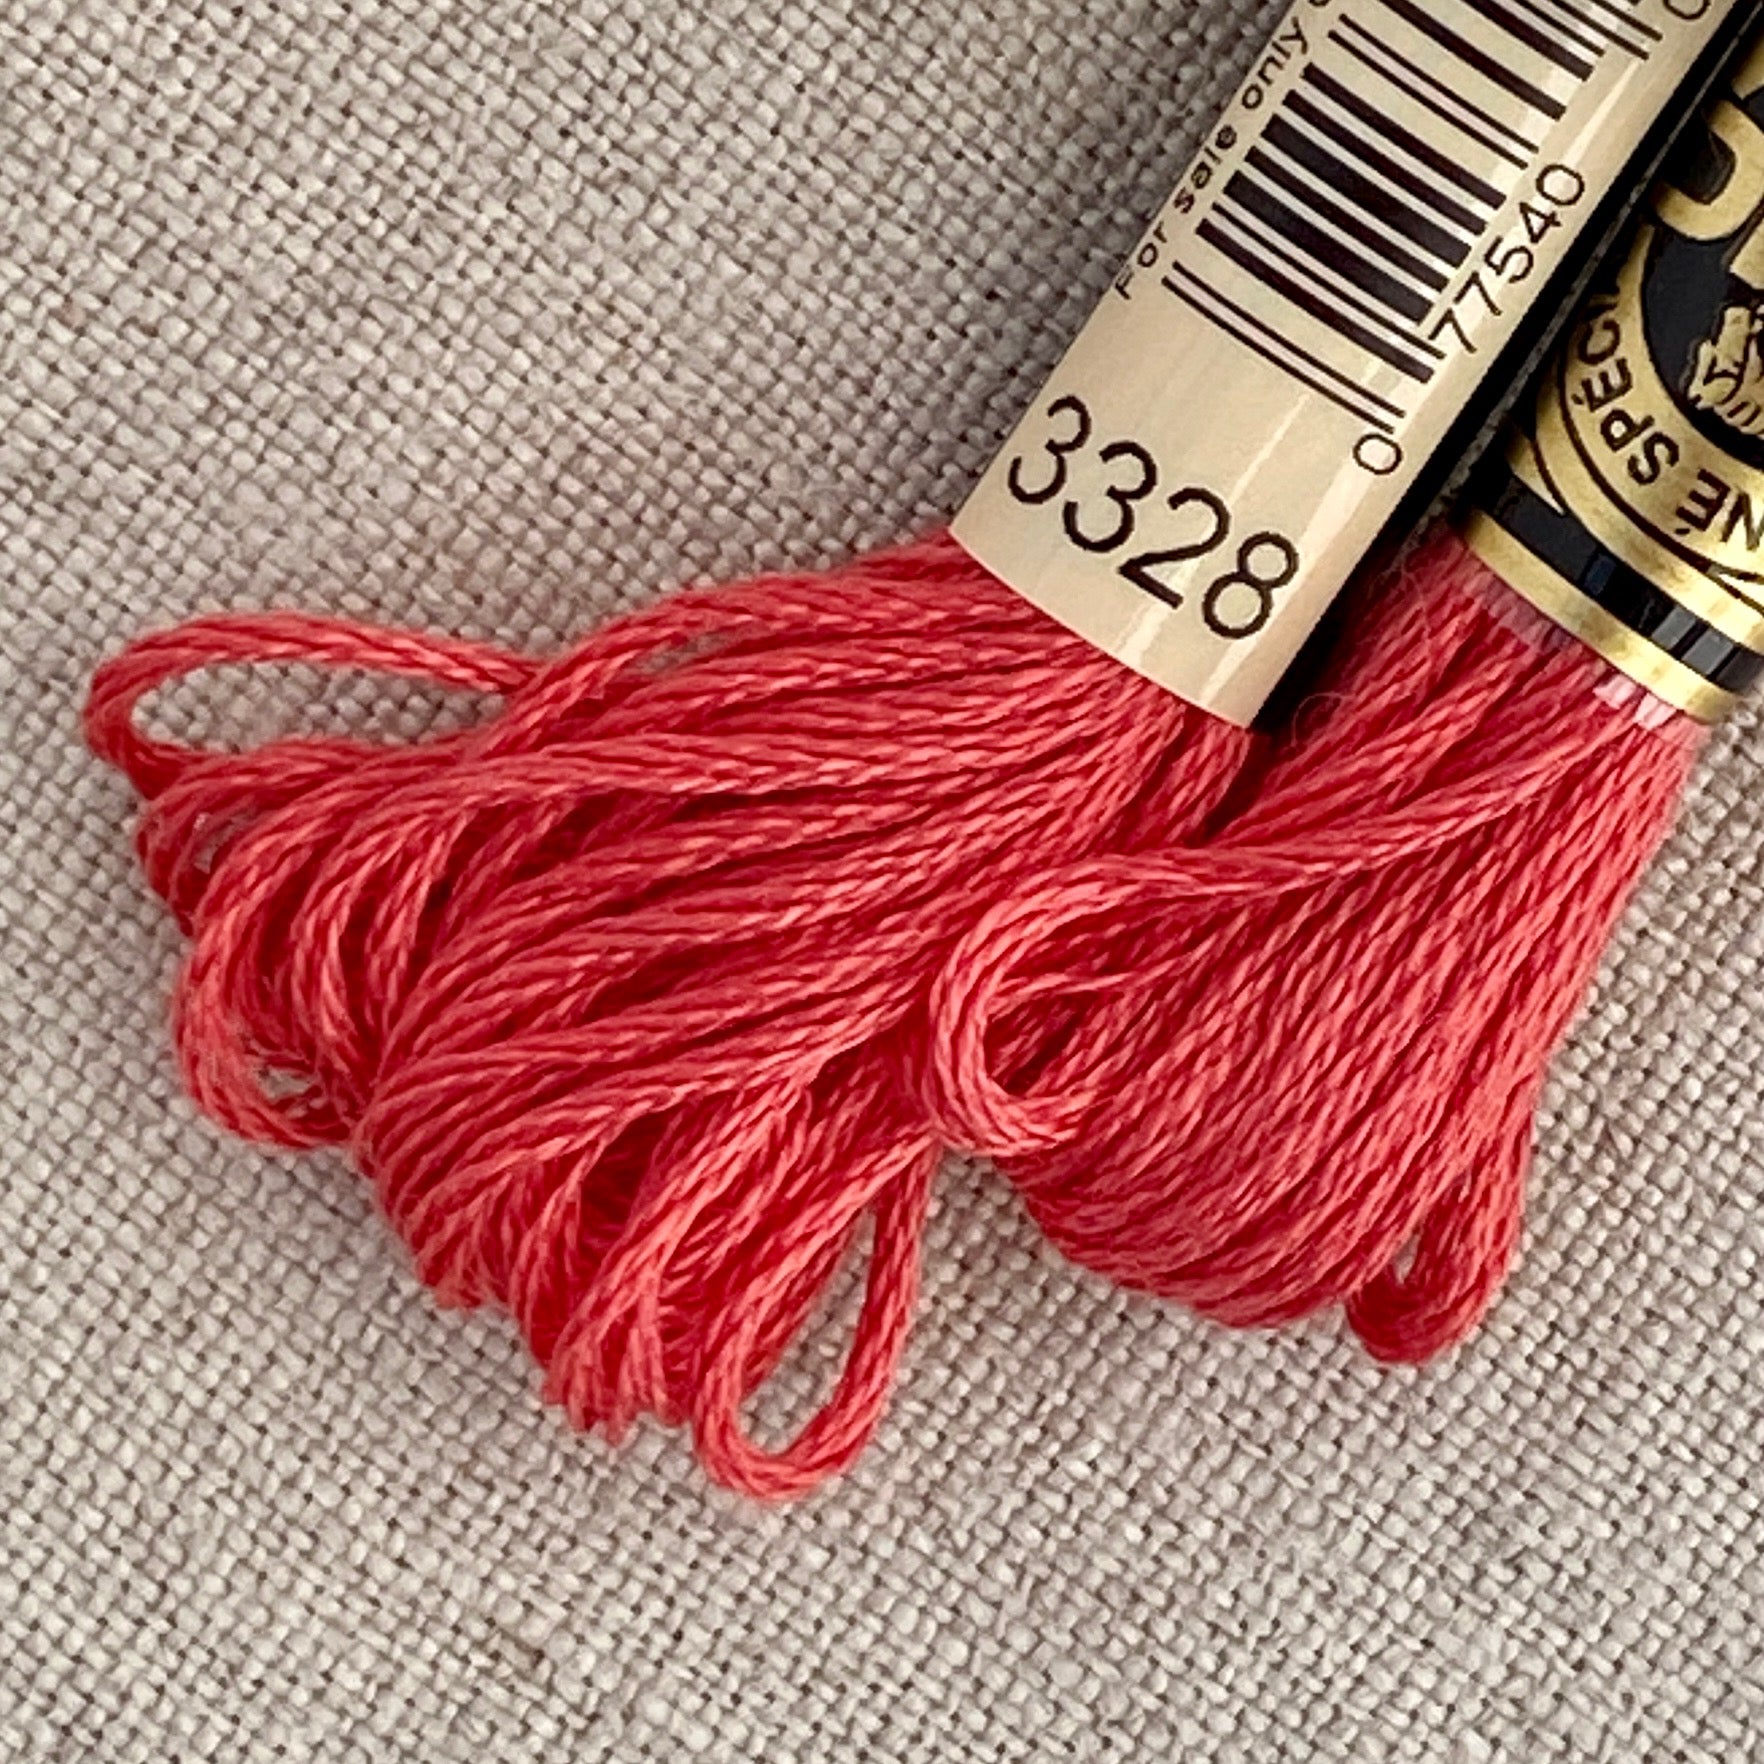 Embroidery Thread - Cherry Red - #321